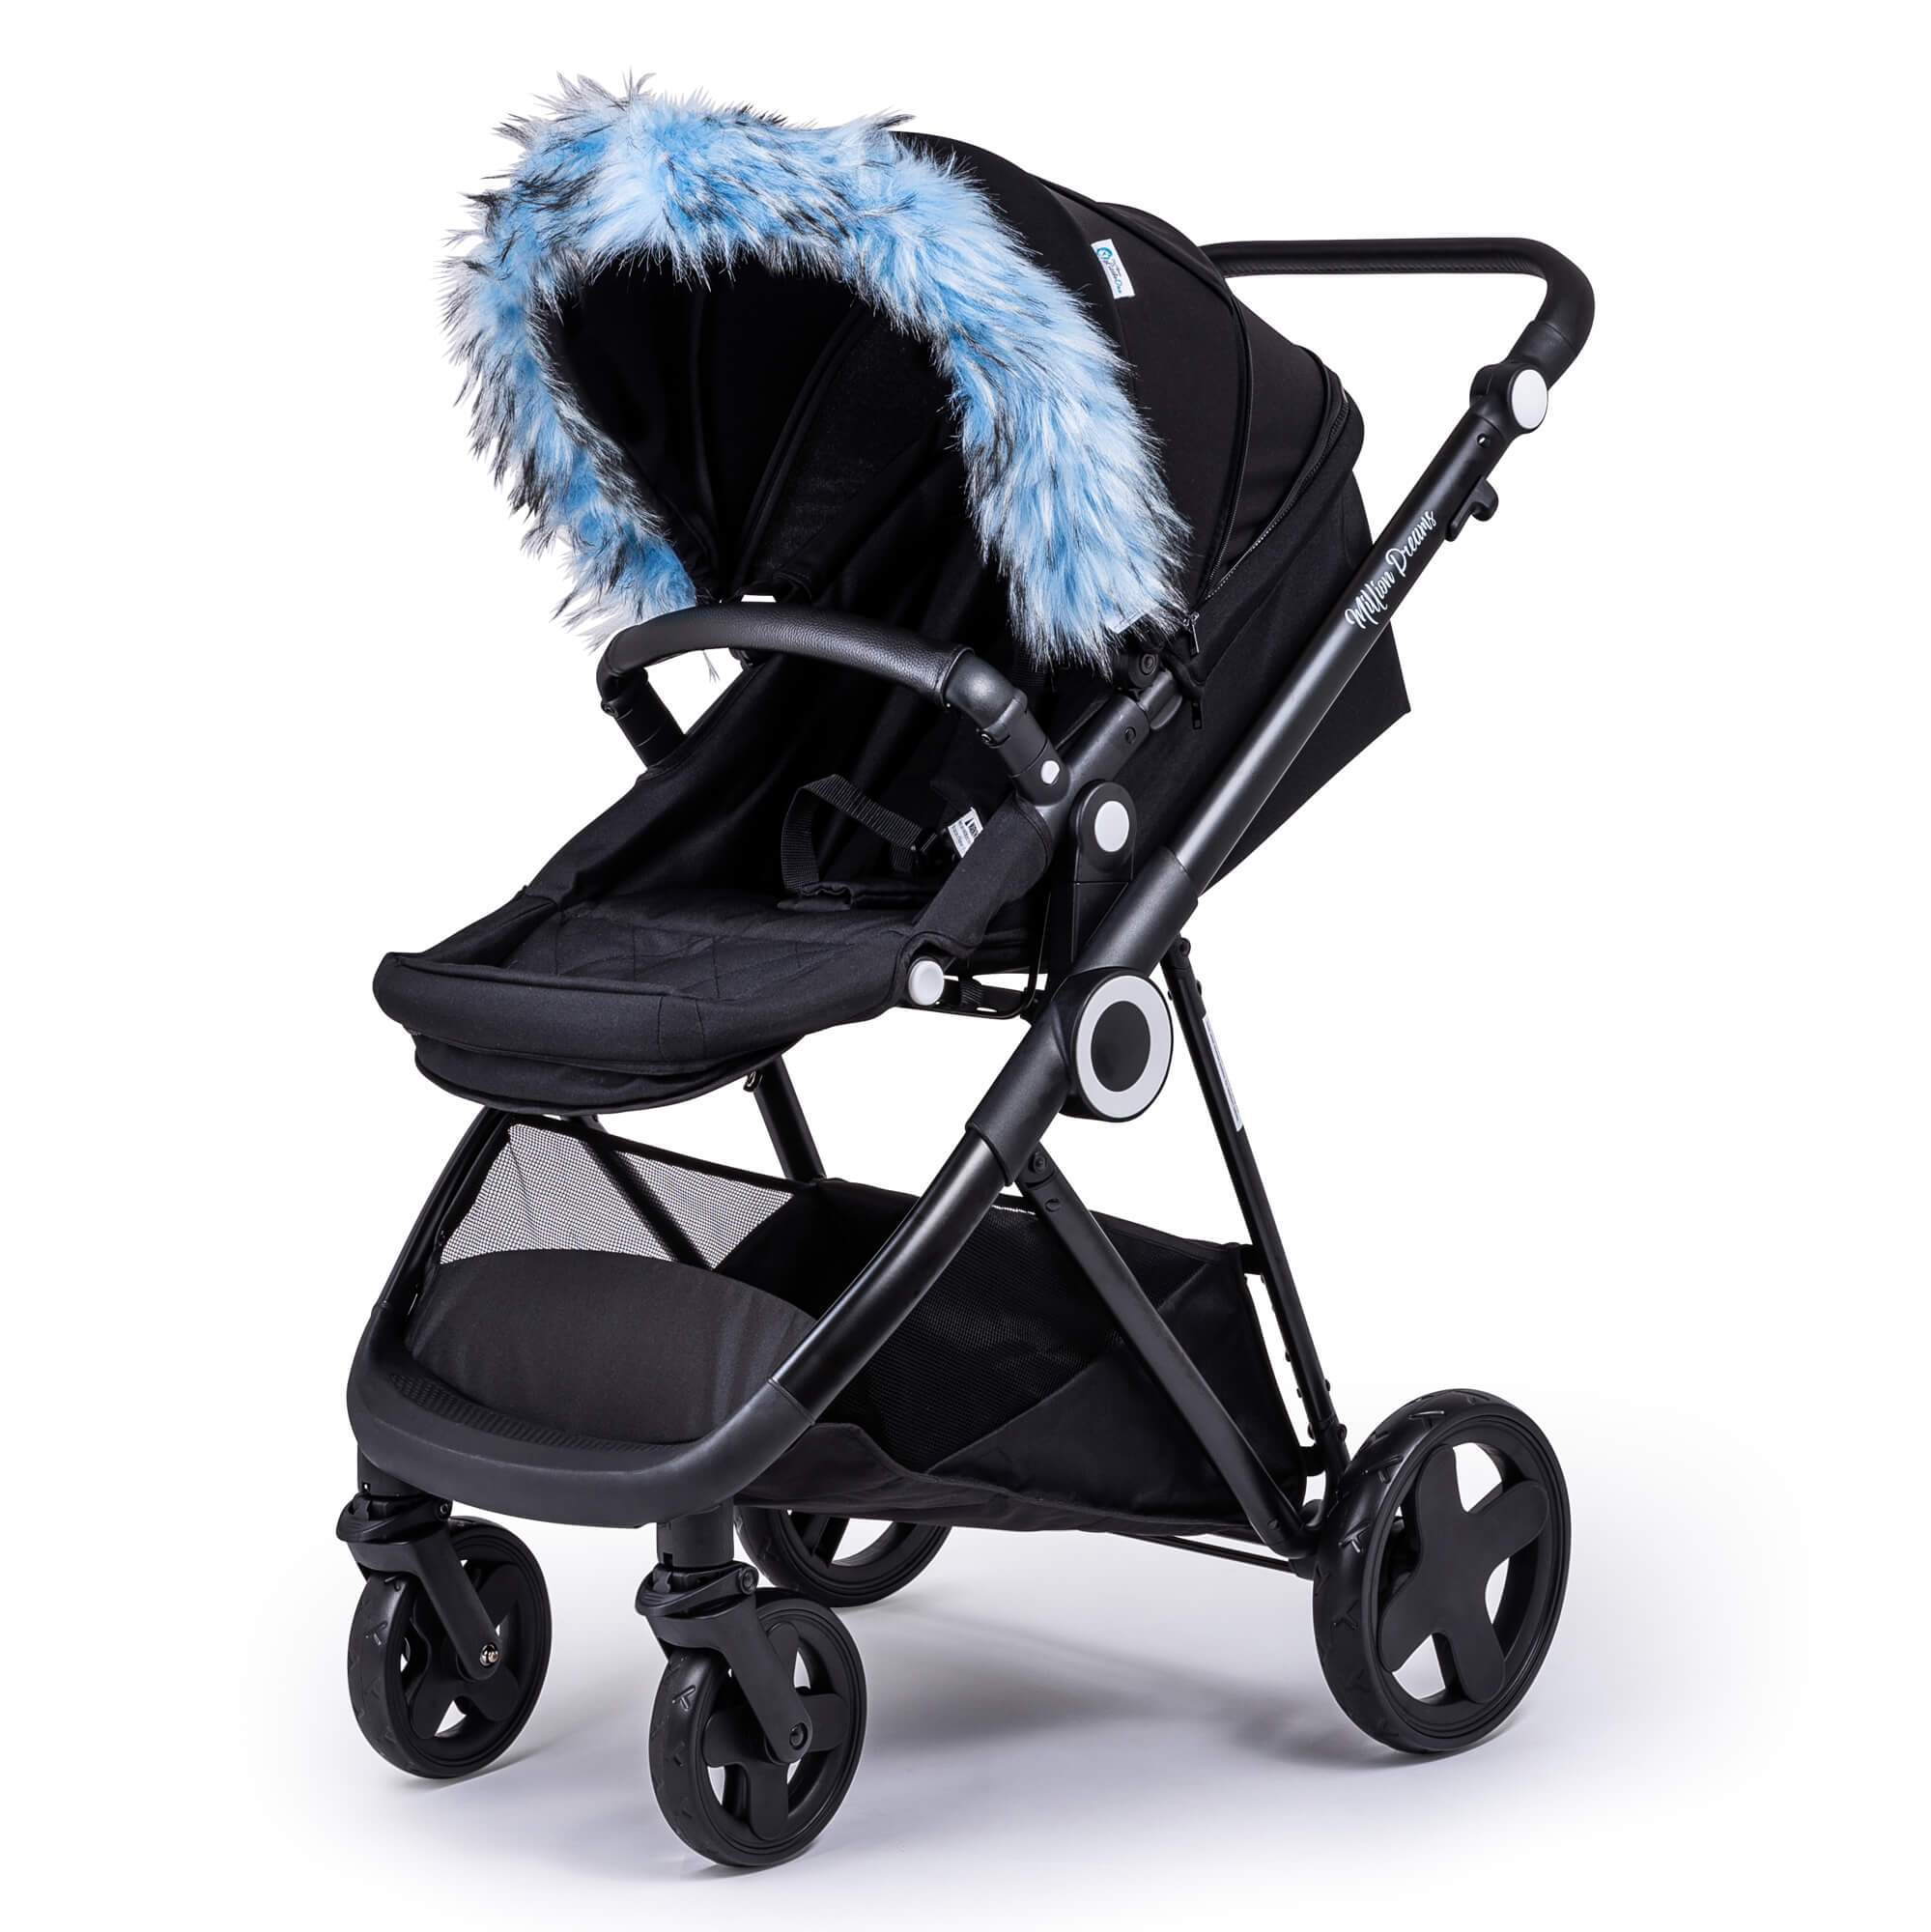 Pram Fur Hood Trim Attachment for Pushchair Compatible with Mamas & Papas - Light Blue / Fits All Models | For Your Little One